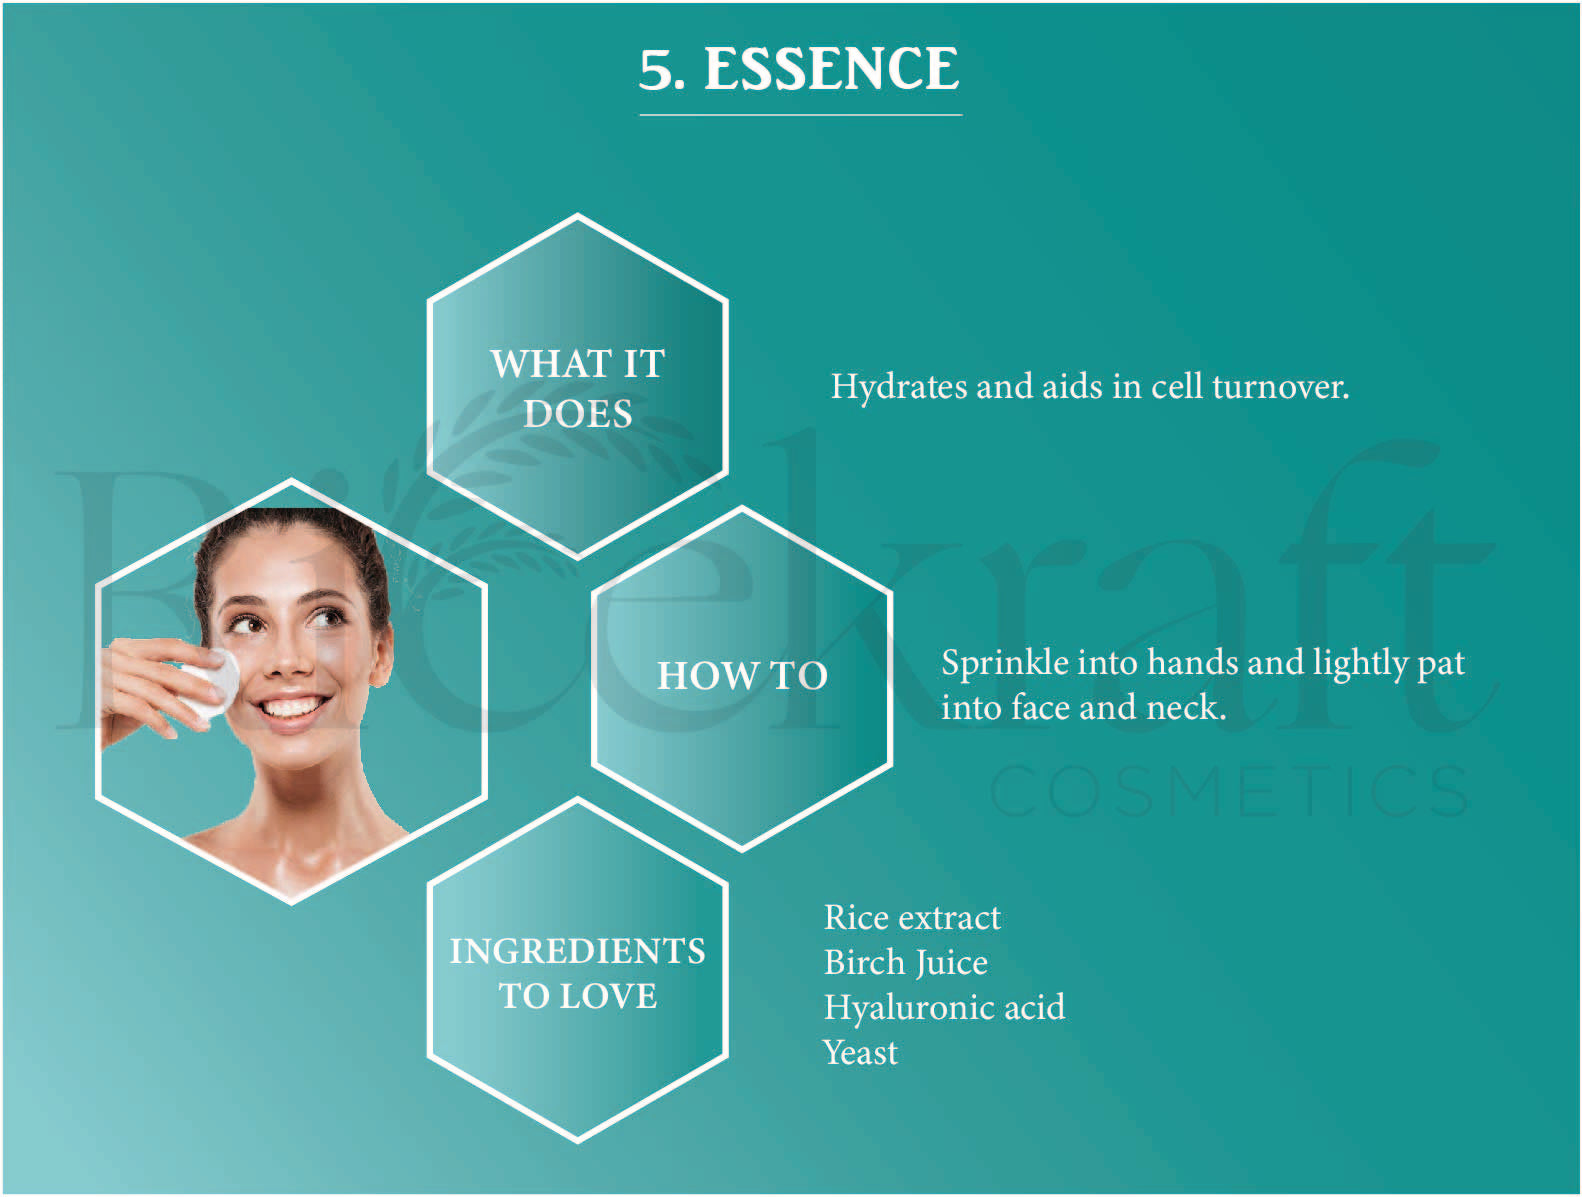 Essence with hydrating ingredients: Rice extract, Birch Juice, Hyaluronic acid, and Yeast."